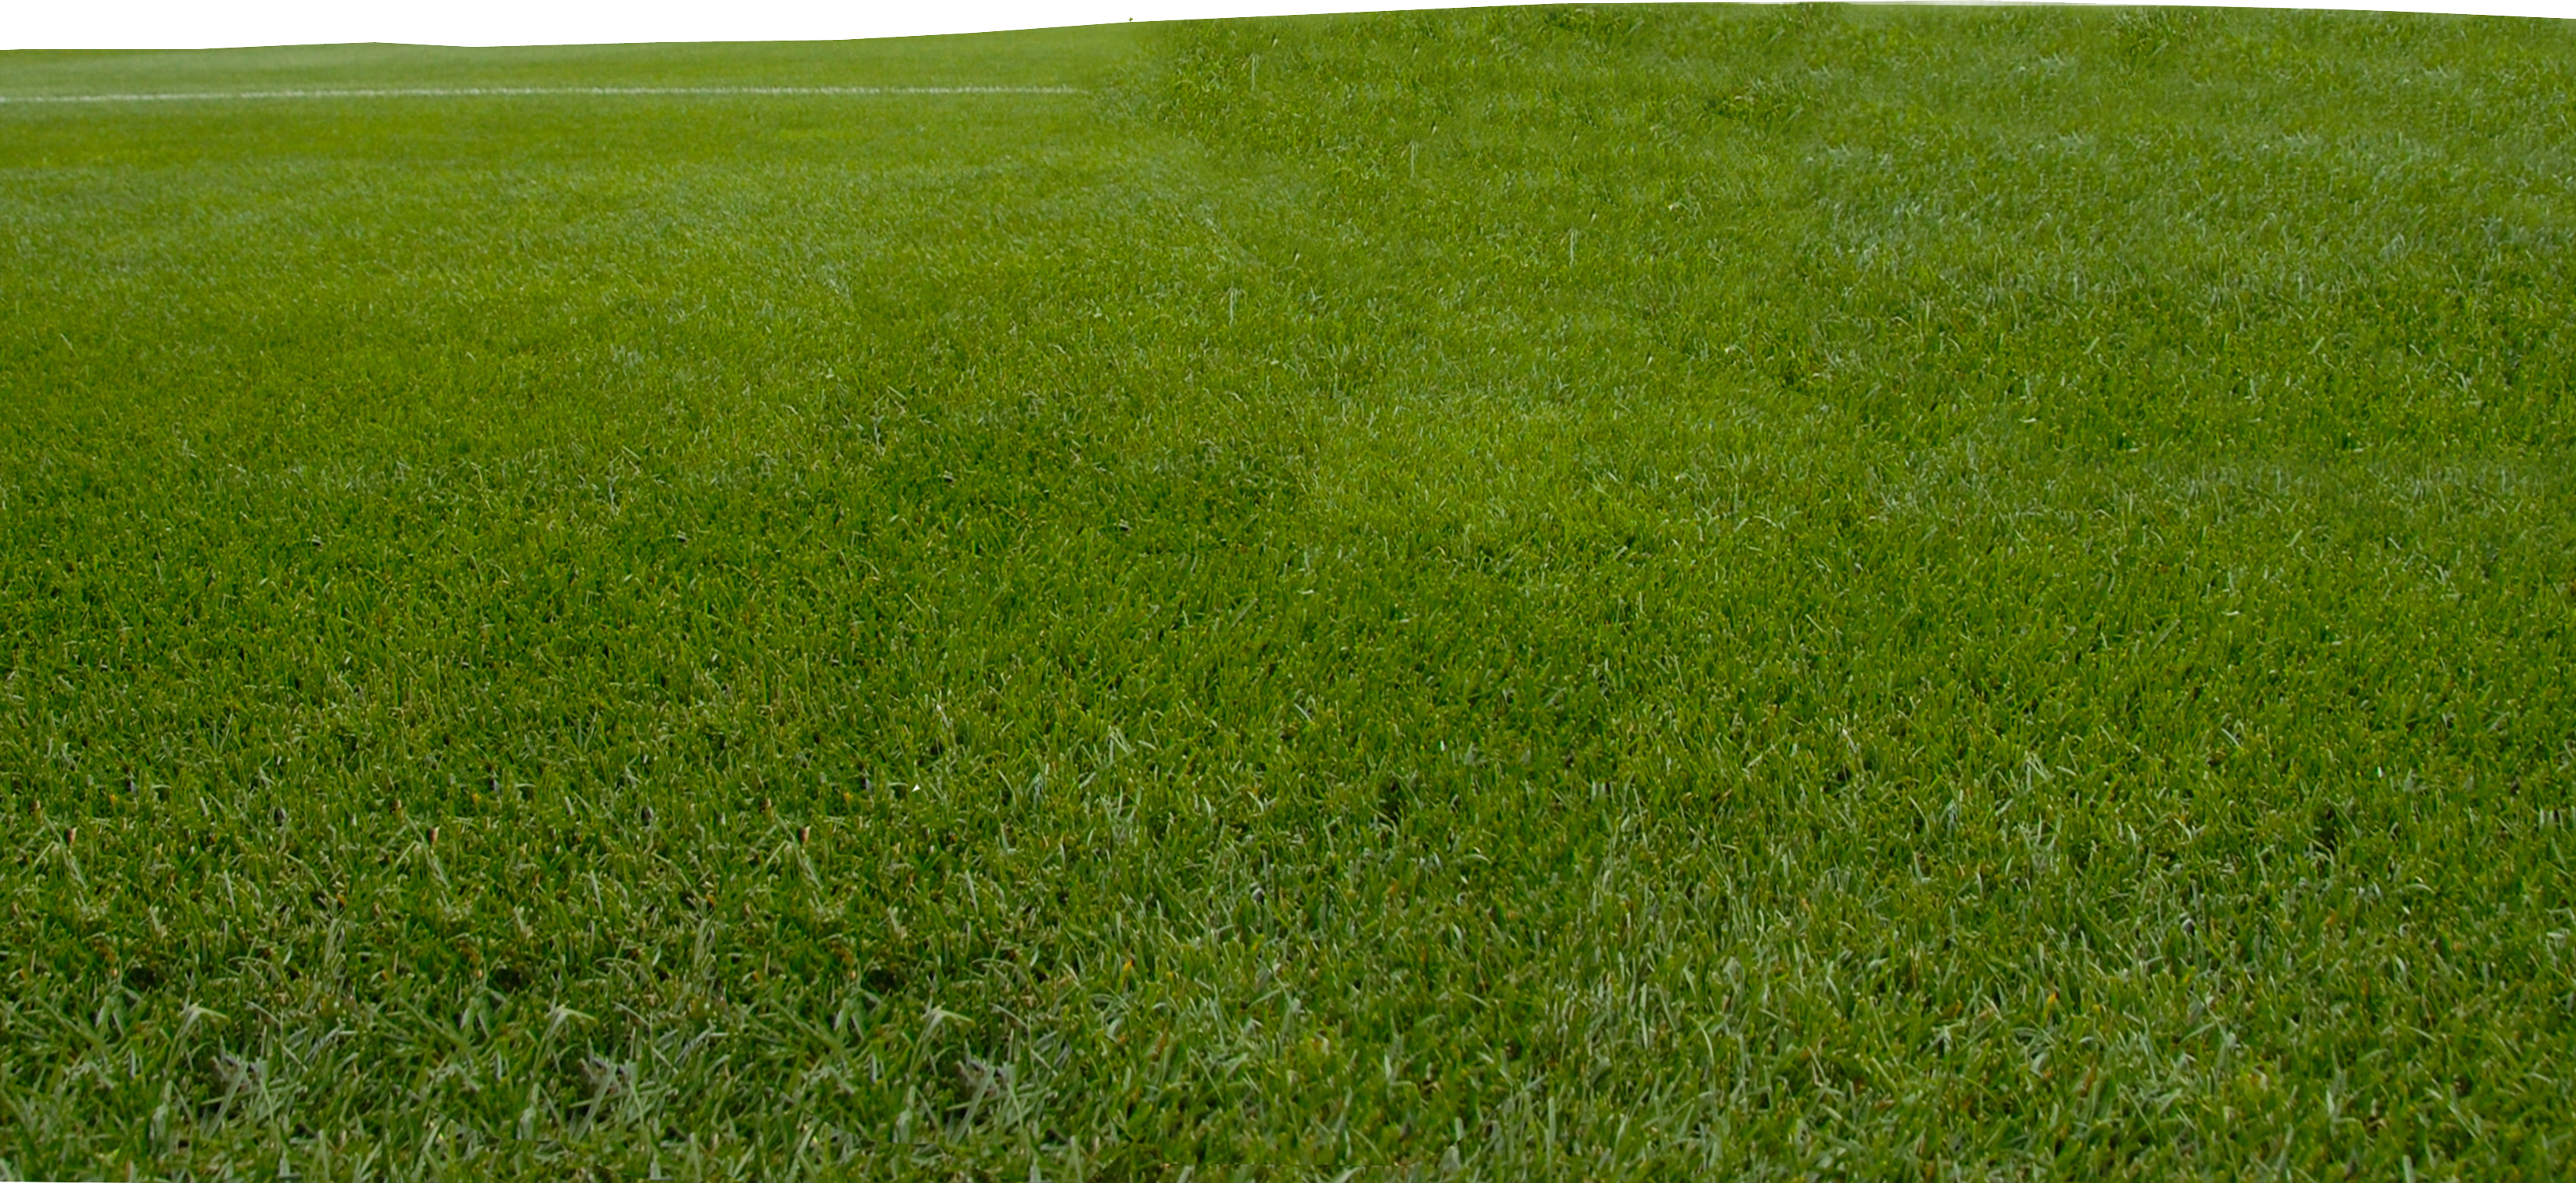 Grass | Free Images at Clker.com - vector clip art online, royalty ...